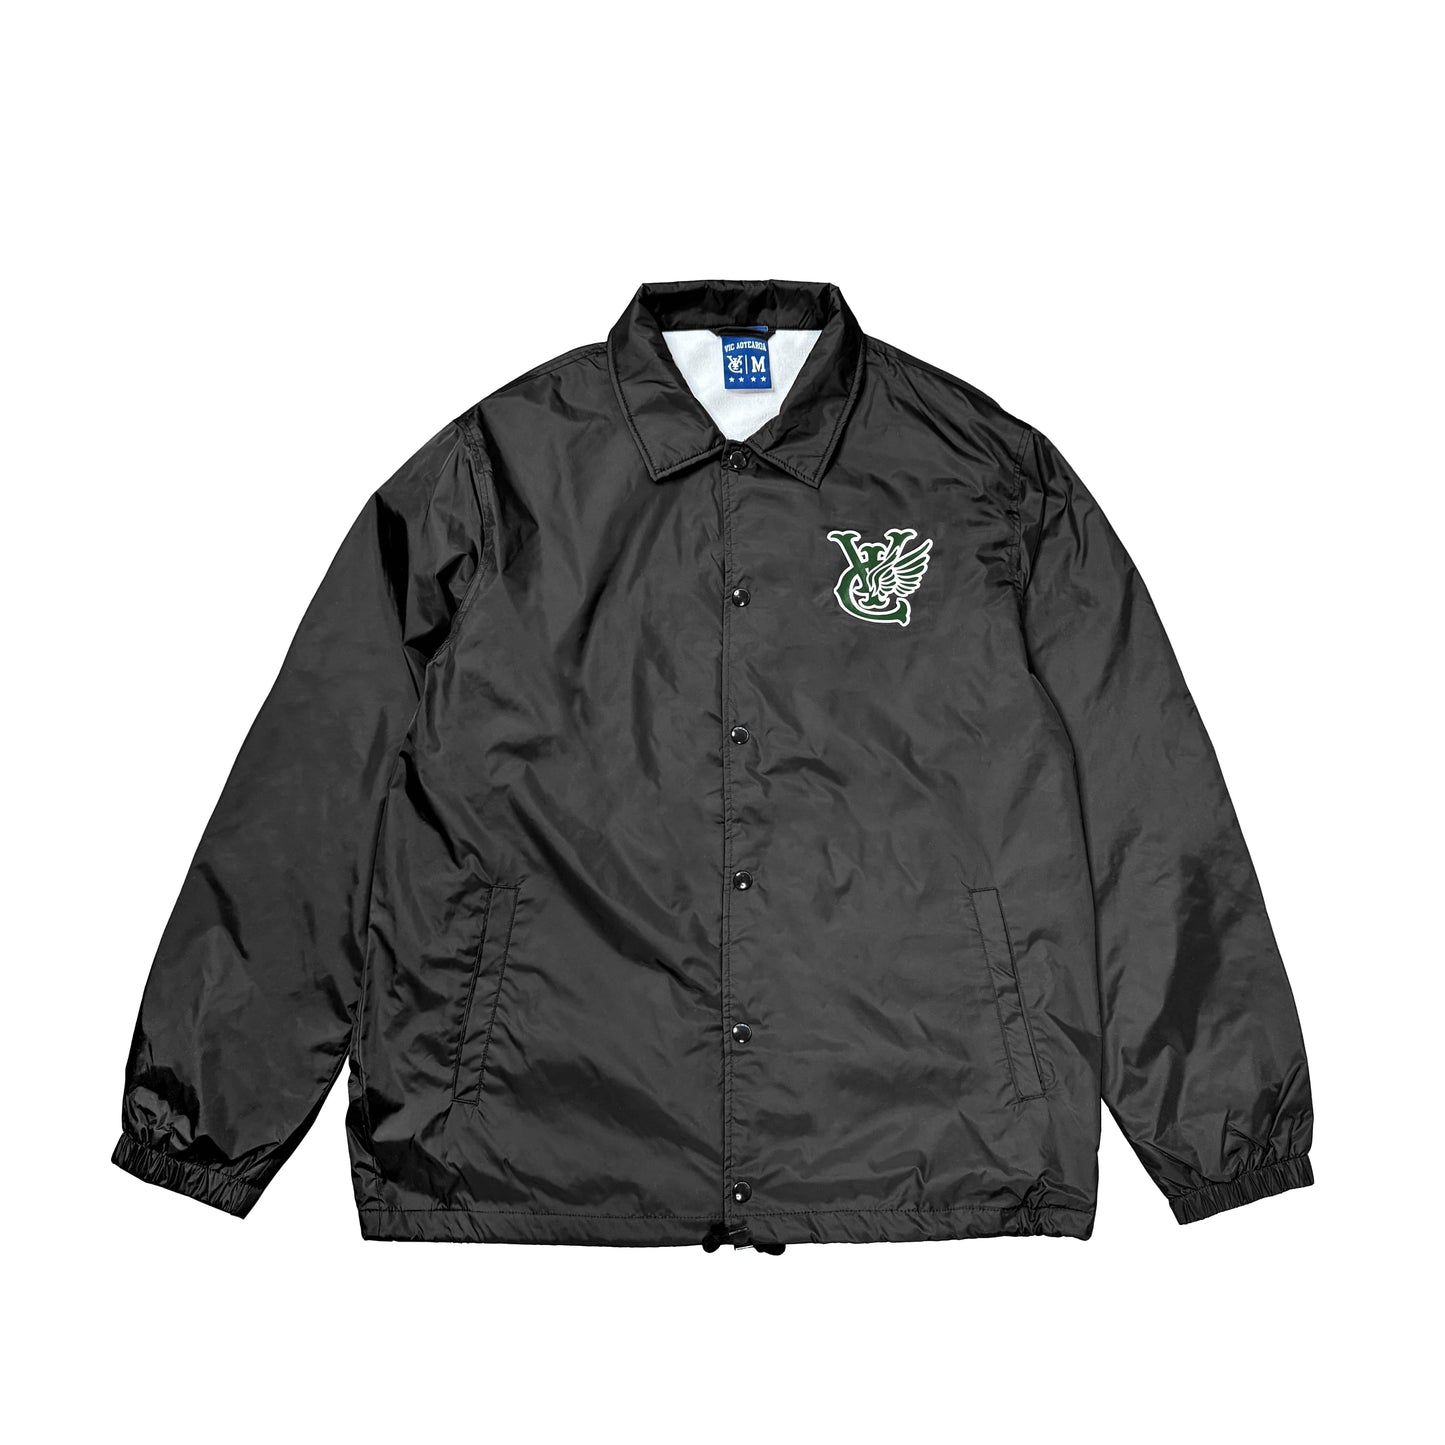 Introducing our Wing Coach Jacket: A durable micro poplin polyester jacket with a water-resistant finish. Stay comfortable with its lightweight microfiber lining and keep essentials handy with 2 side pockets. Featuring a printed logo at the left chest and a convenient YKK snap front closure. Elevate your style with ease in our Wing Coach Jacket.